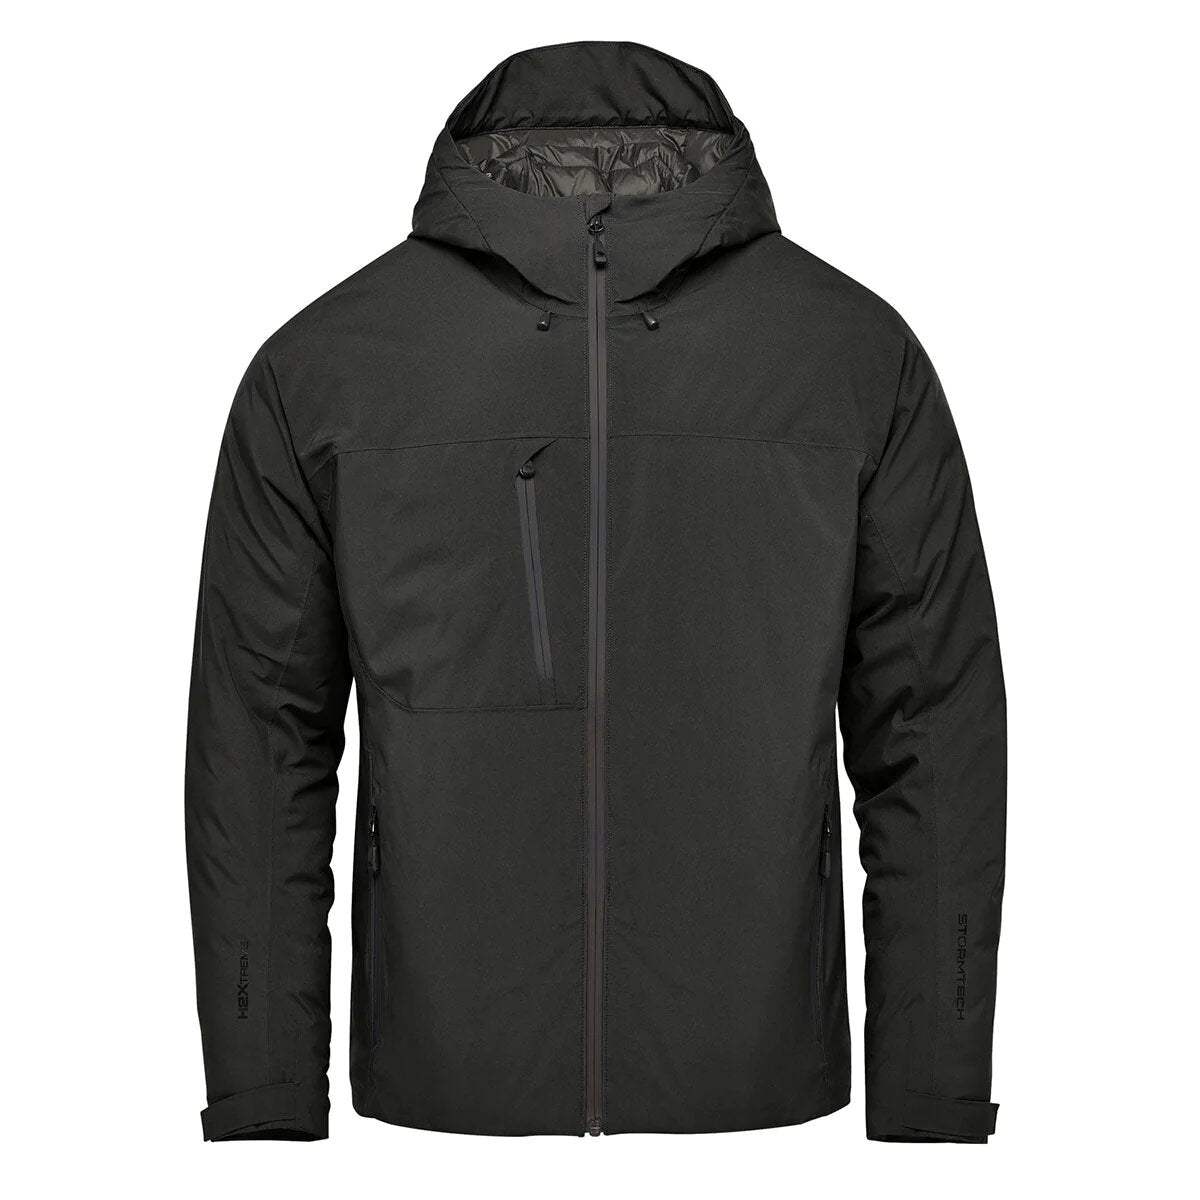 Men’s Nostromo Thermal Shell by Stormtech - Promotions Only Group Limited